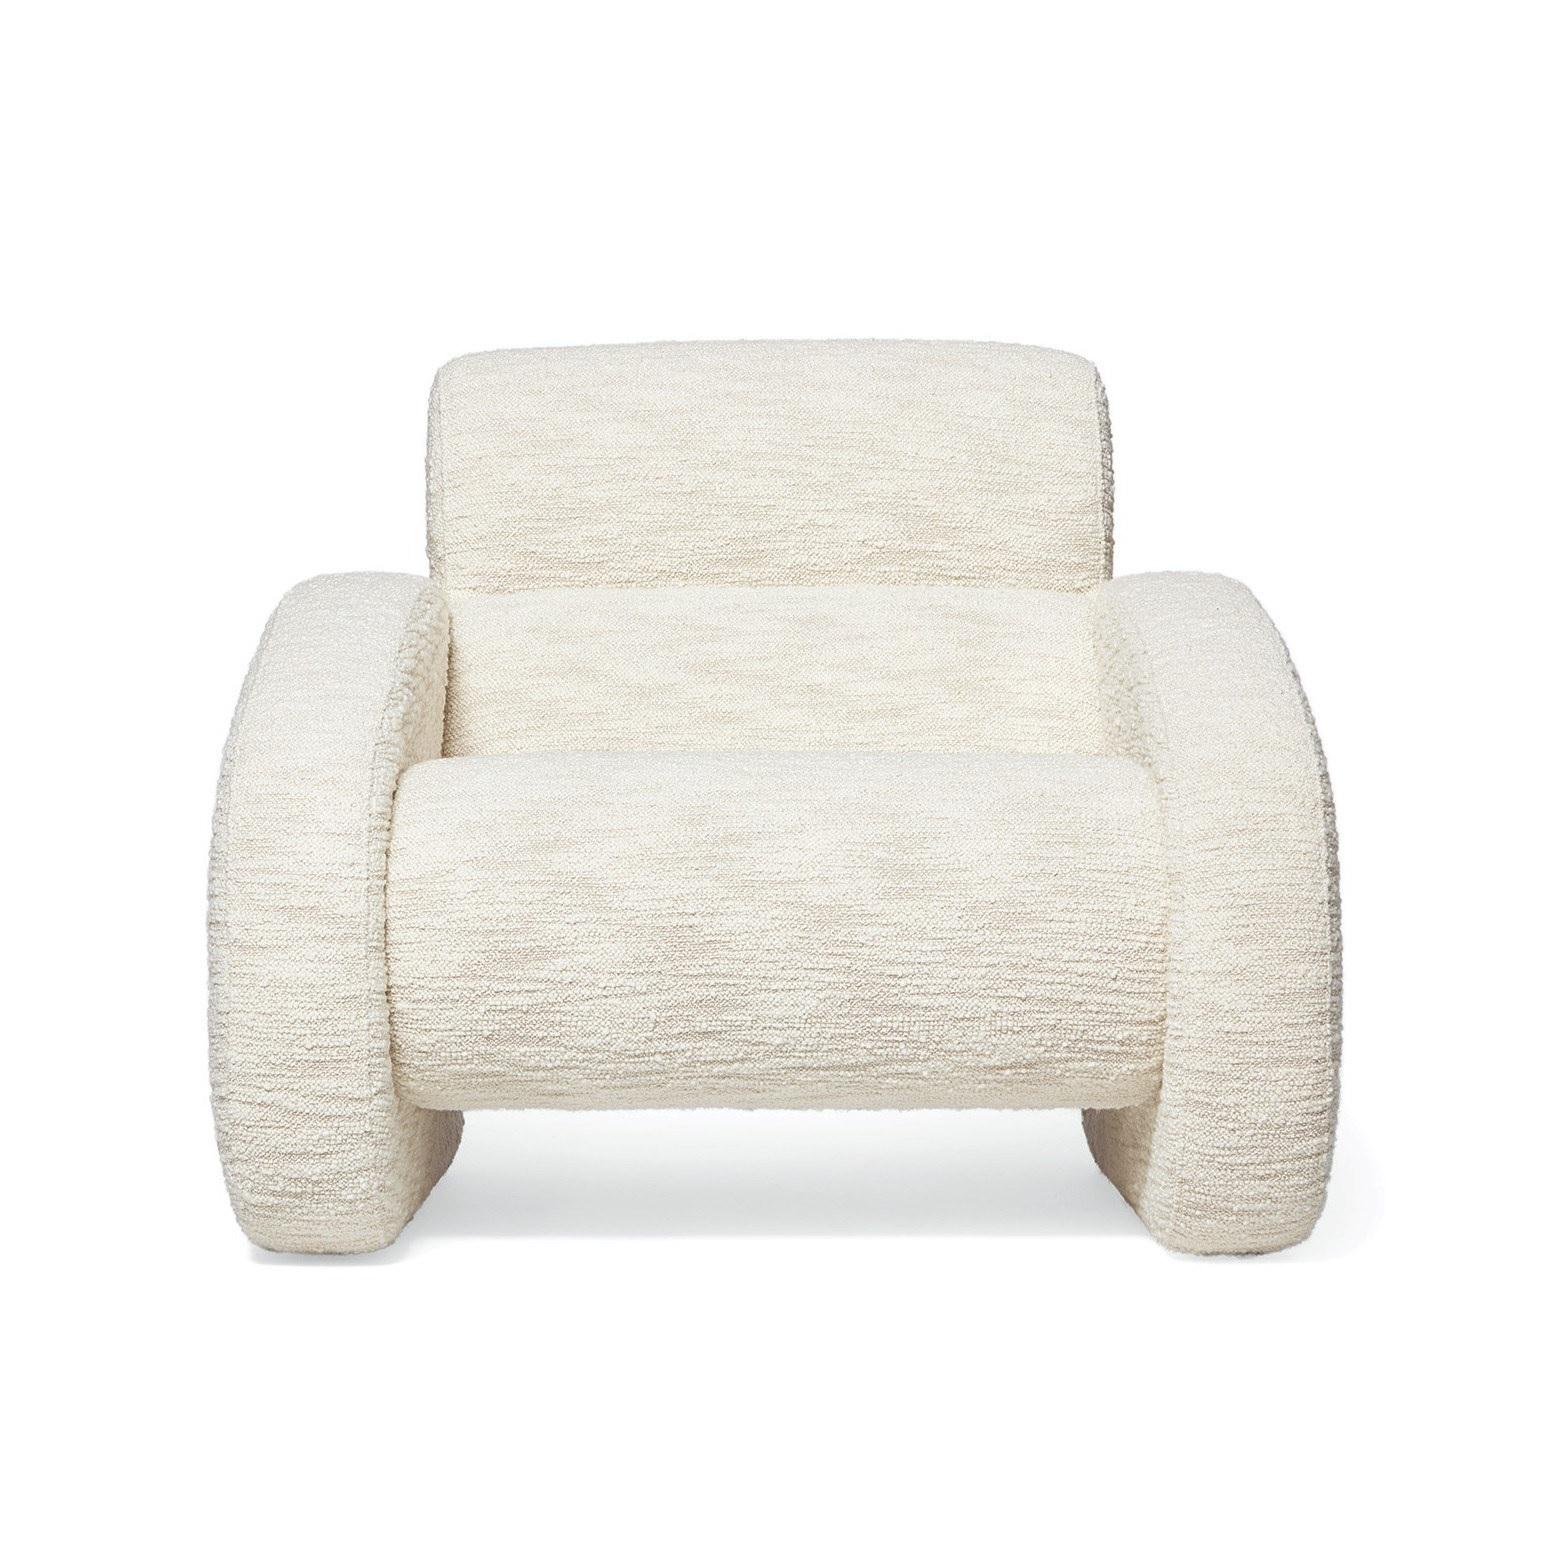 Armchair featuring an enveloping composition of shapes, it’s thorough embrace is perfect for relaxed seating. The arms support the light structure, as the curvy elements of the seat and back make it a statement design that does not compromise